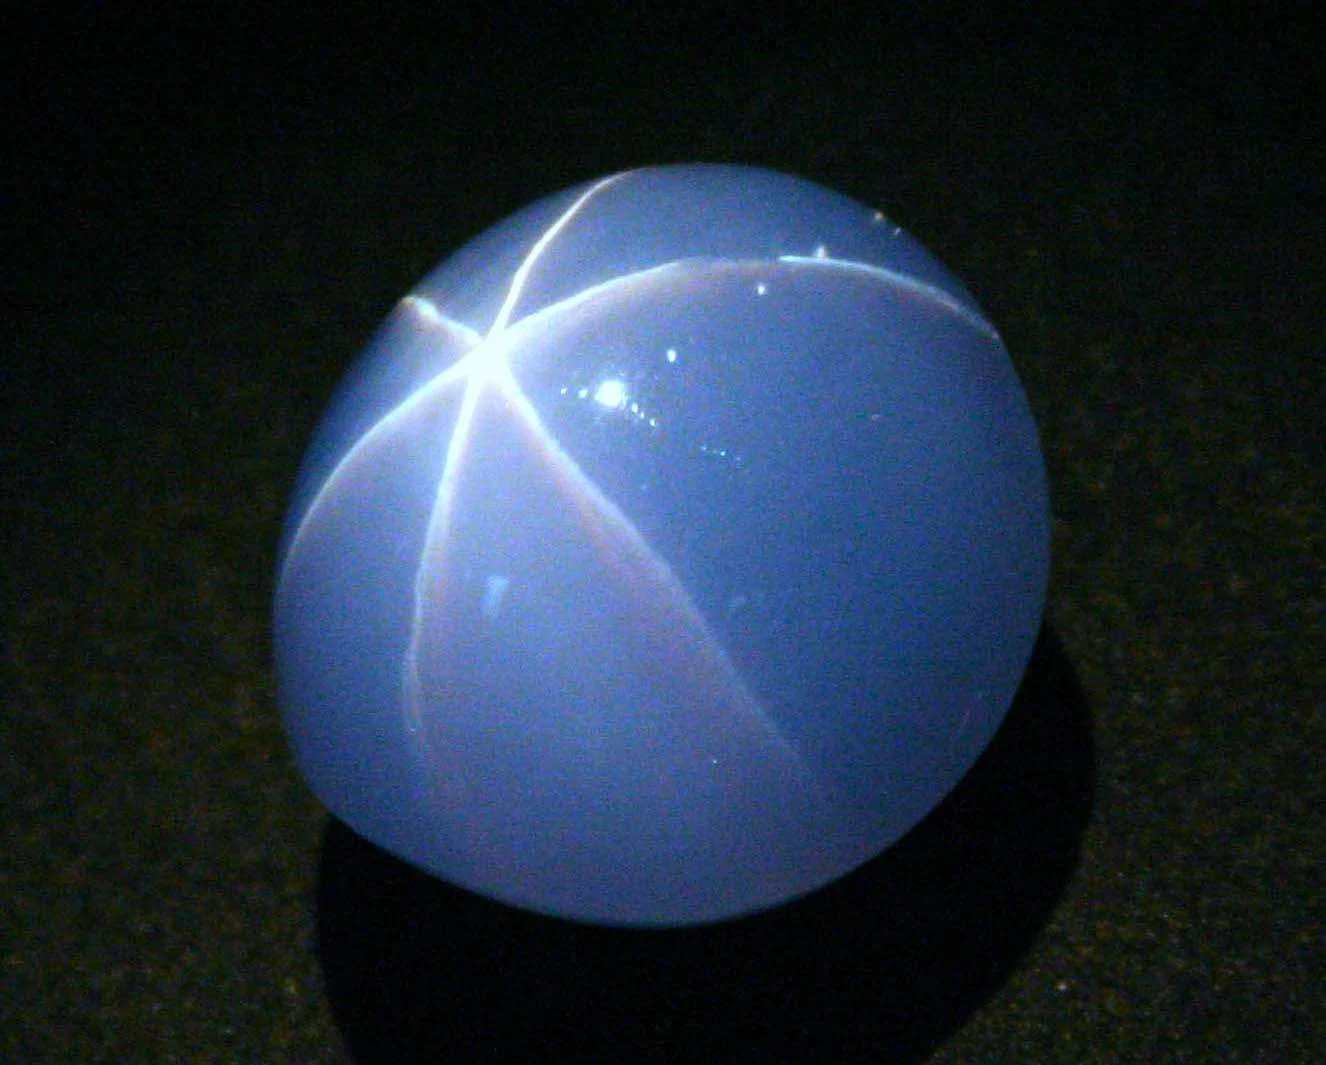 The Star of India is a 563.35 carat (112.67 g) star sapphire.